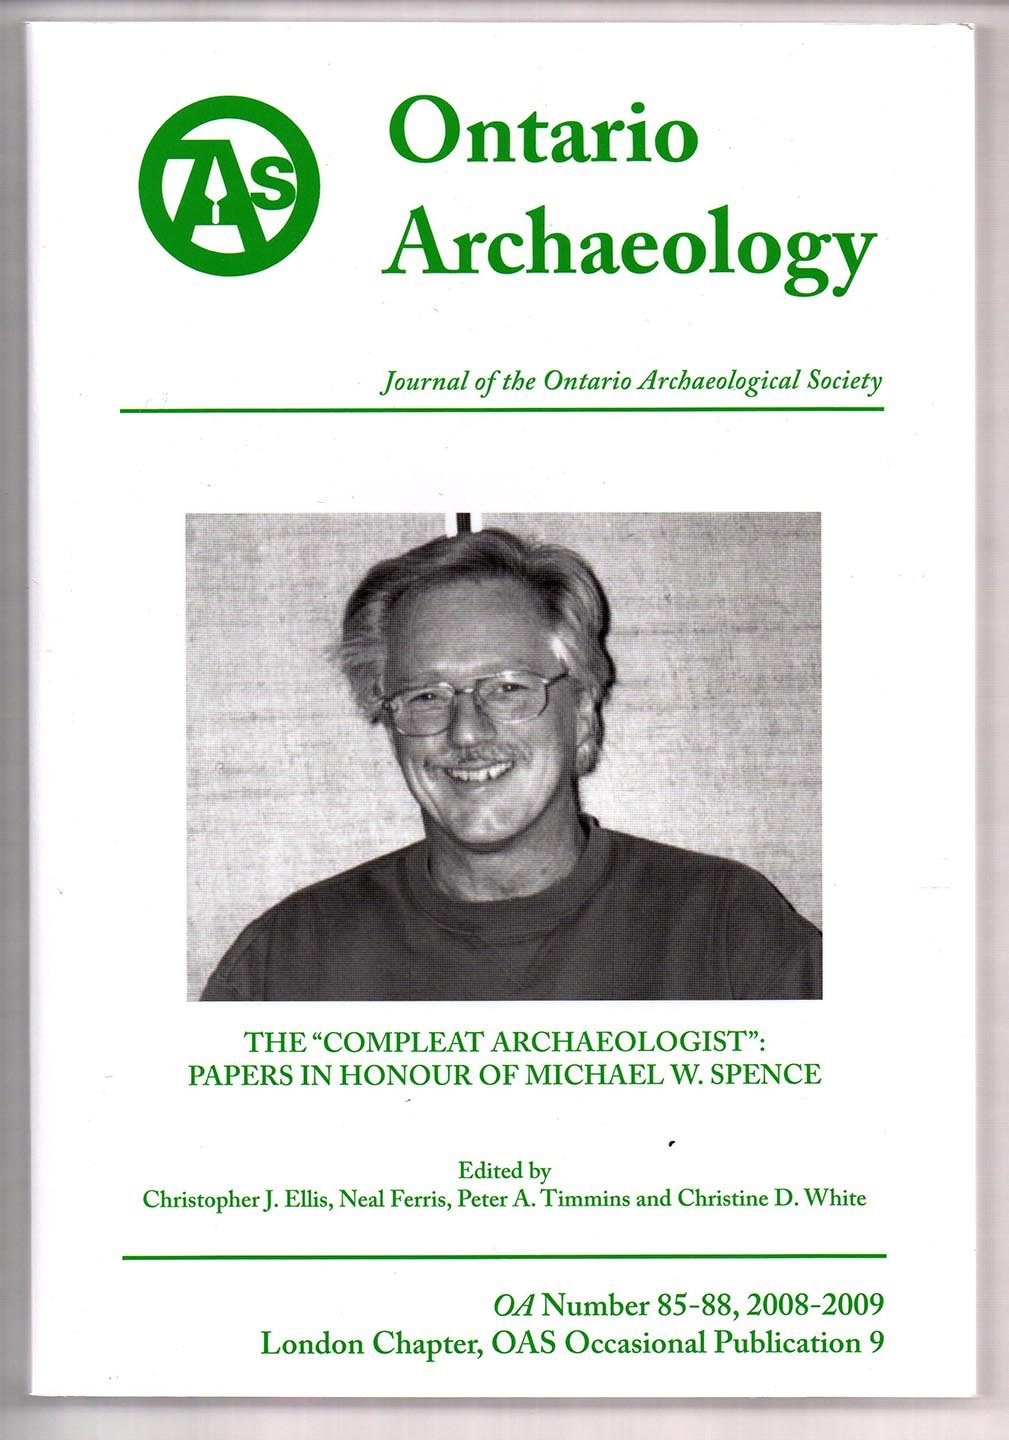 The "Compleat Archaeologist": Papers in Honour of Michael W. Spence